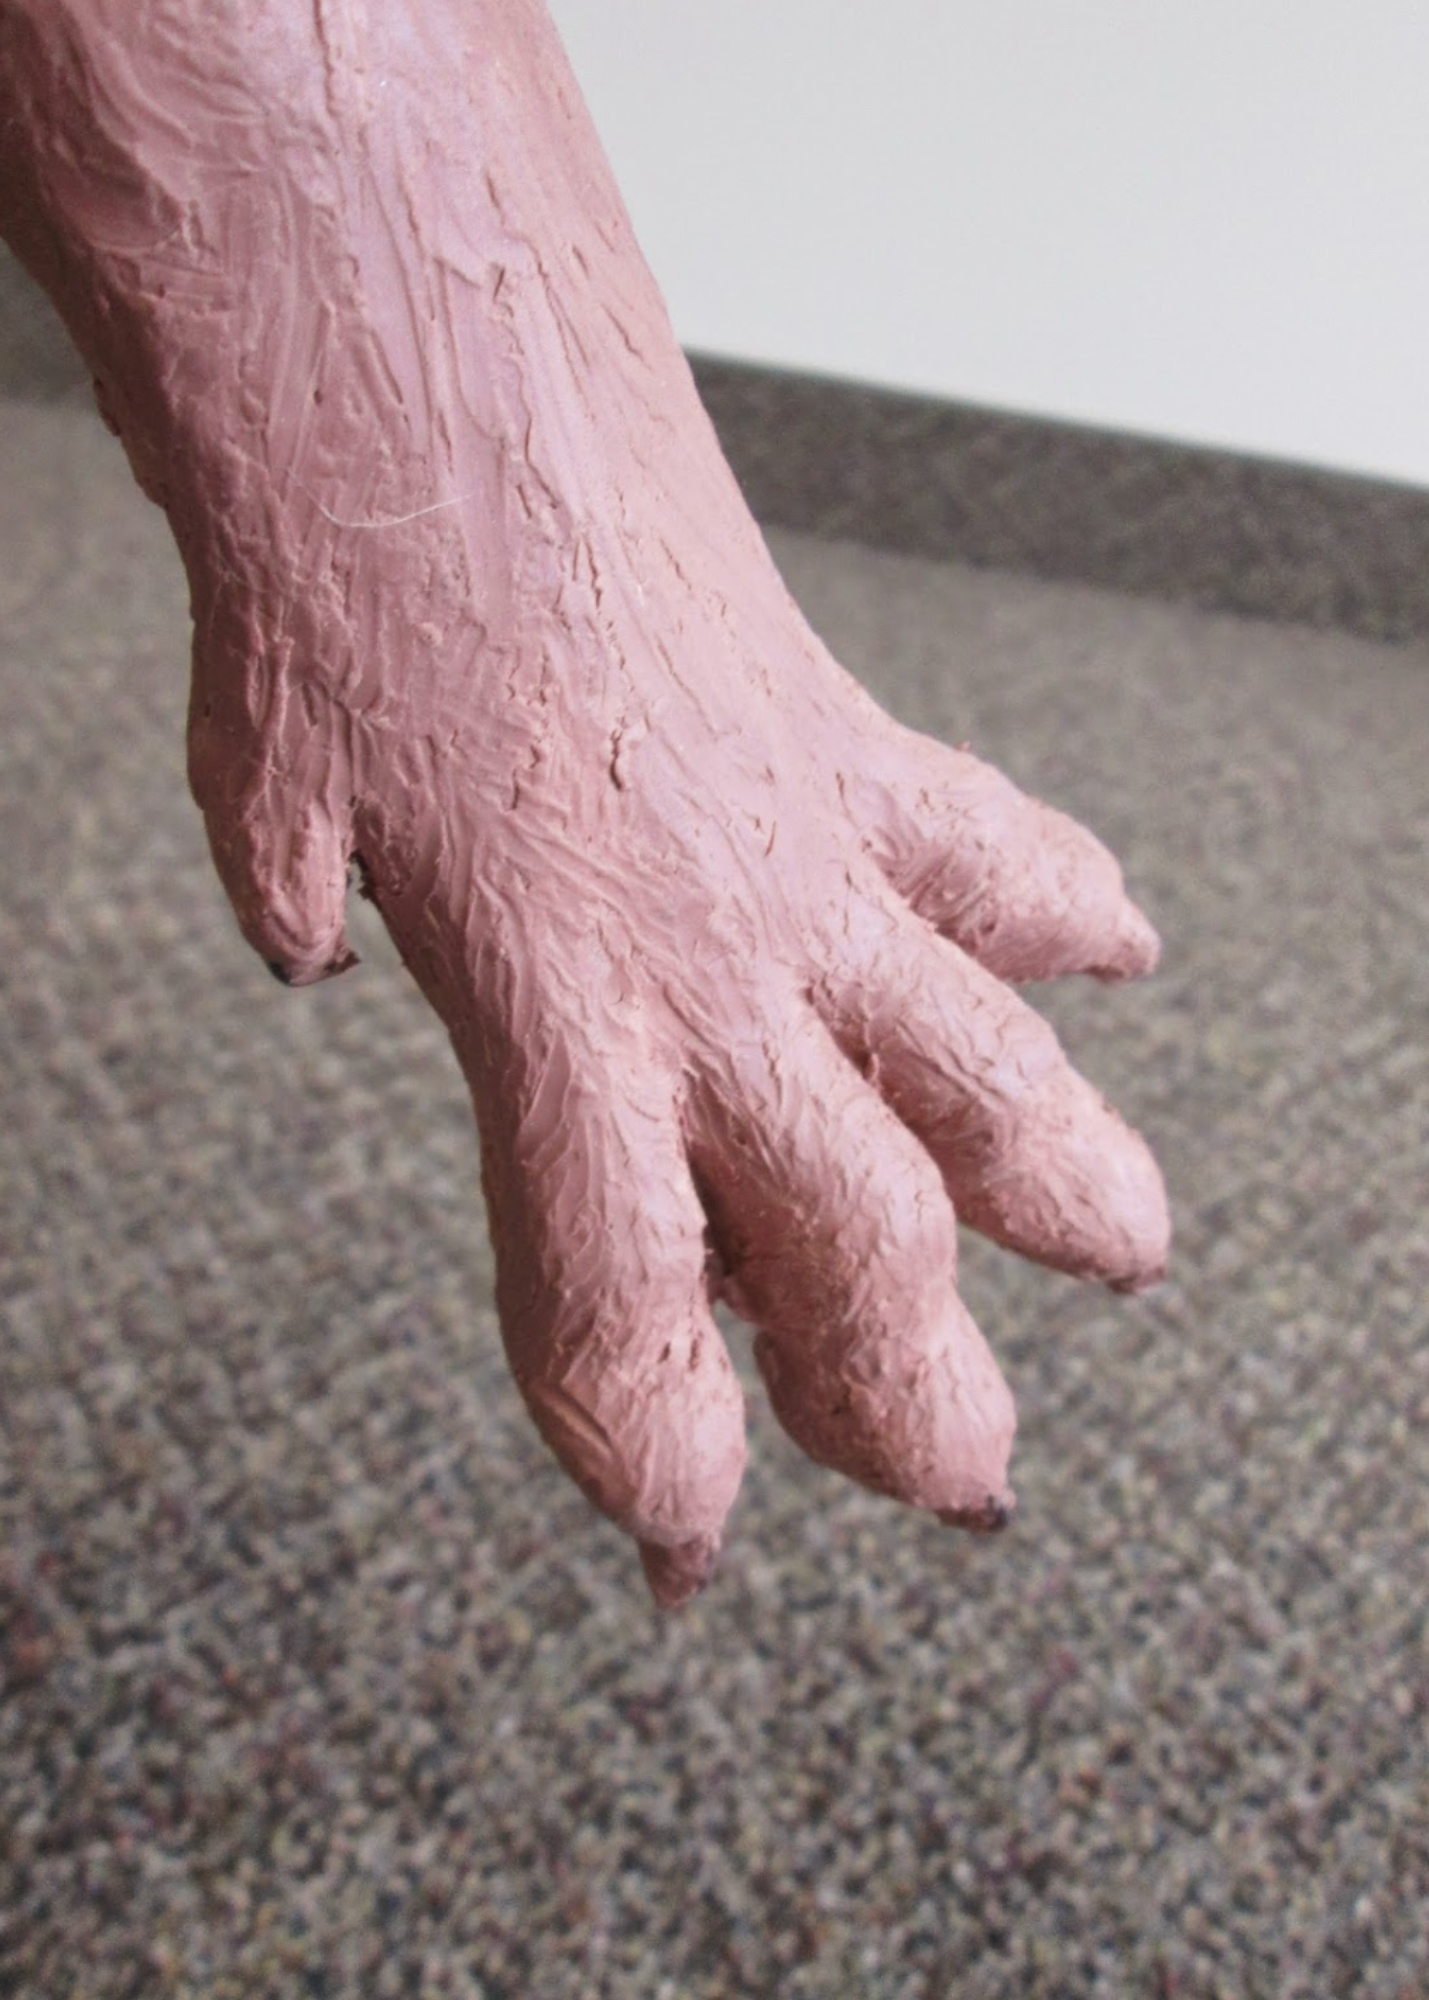 This image shows the splayed toes to allow bandaging training.